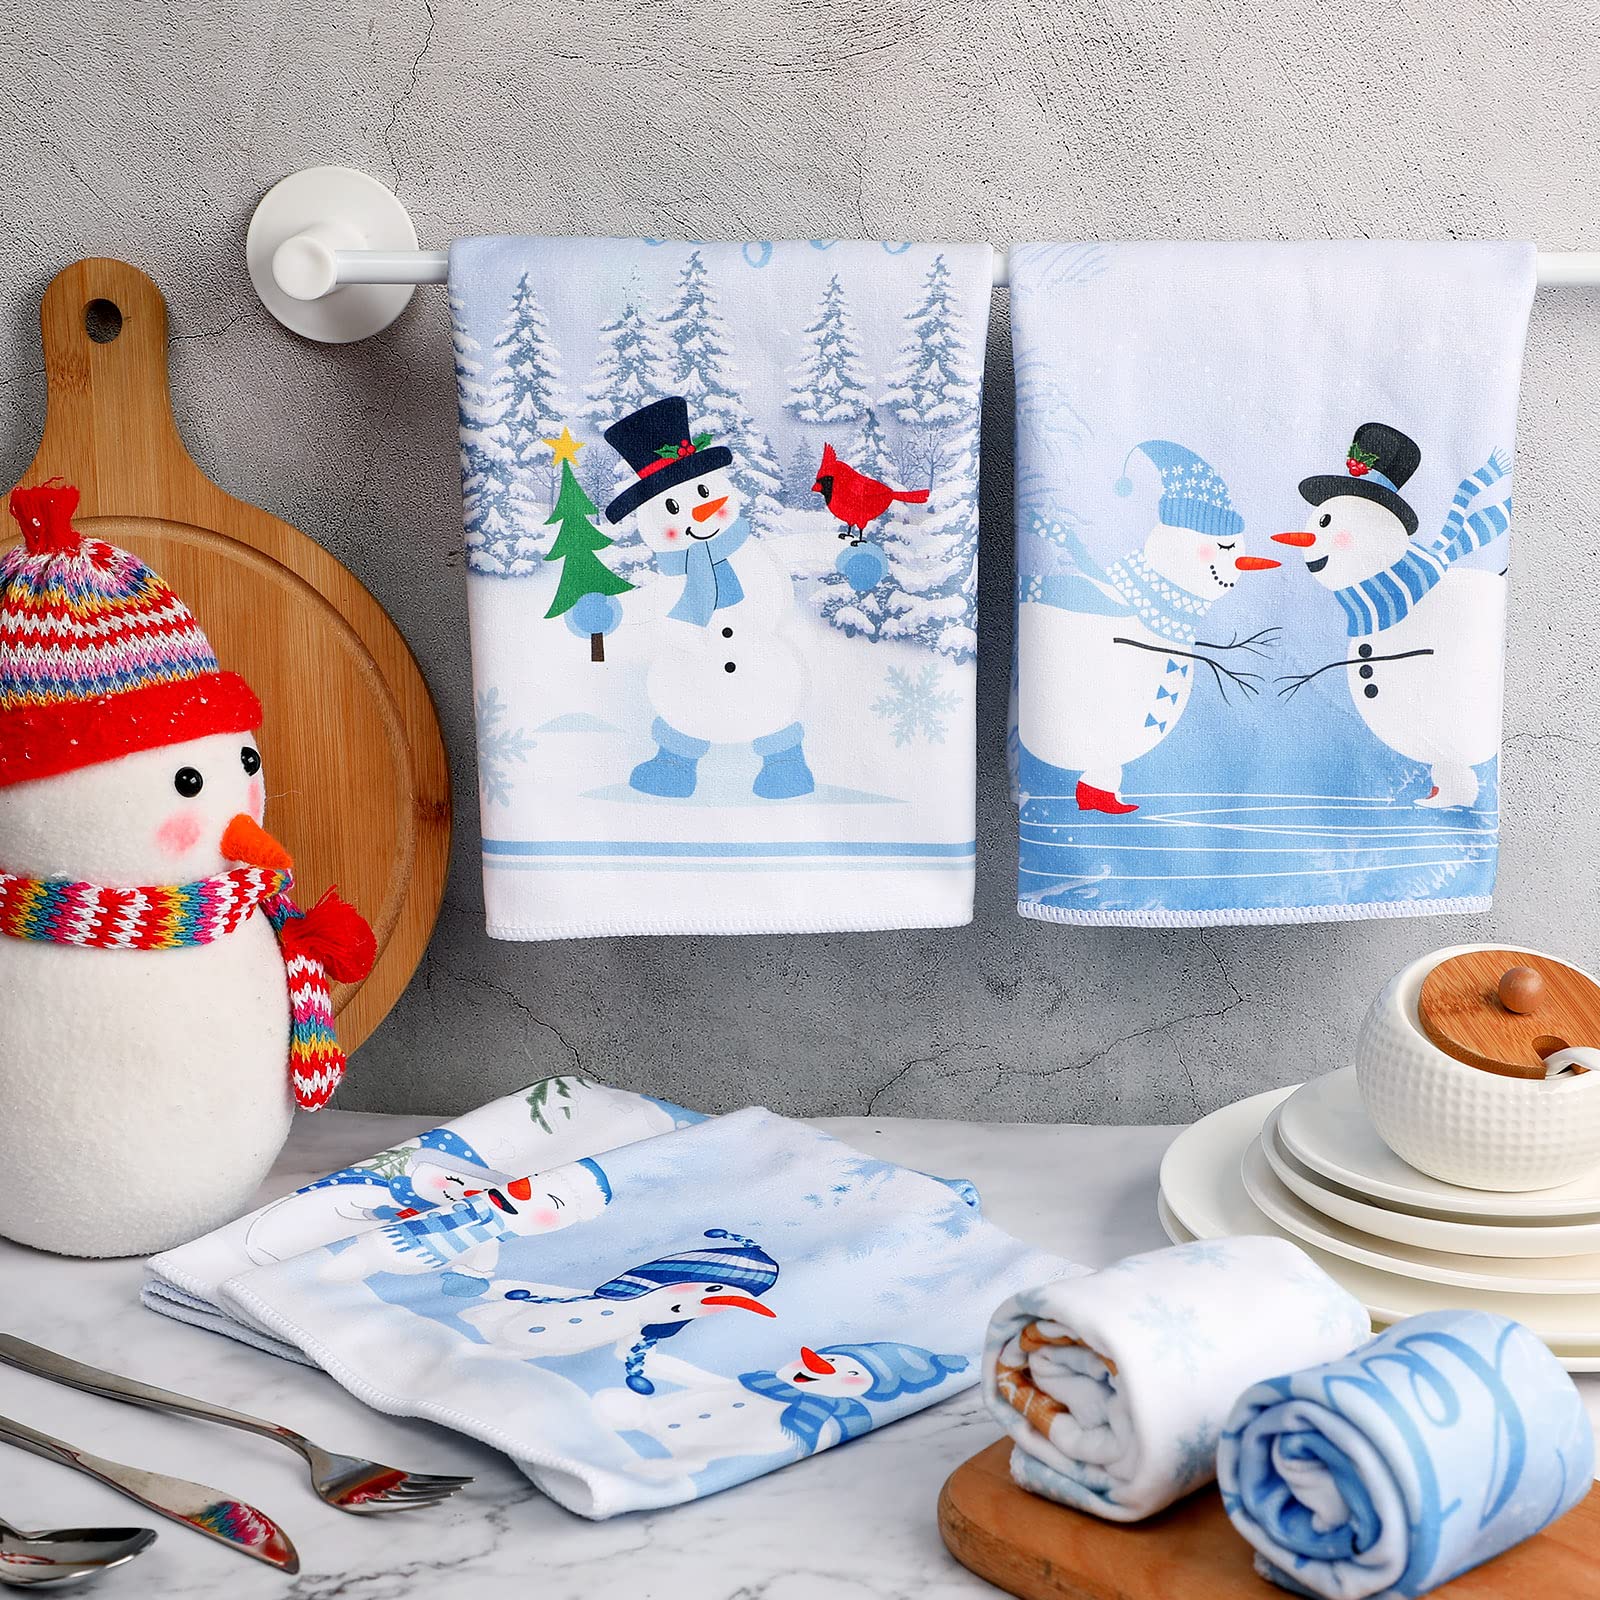 Panelee 6 Pcs Christmas Kitchen Hand Towels 12 x 18 Inch Winter Guest Towel Tea Towels Dish Washcloths Holiday Seasonal Soft Absorbent Towels for Home Cooking Baking Cleaning (Snowman)